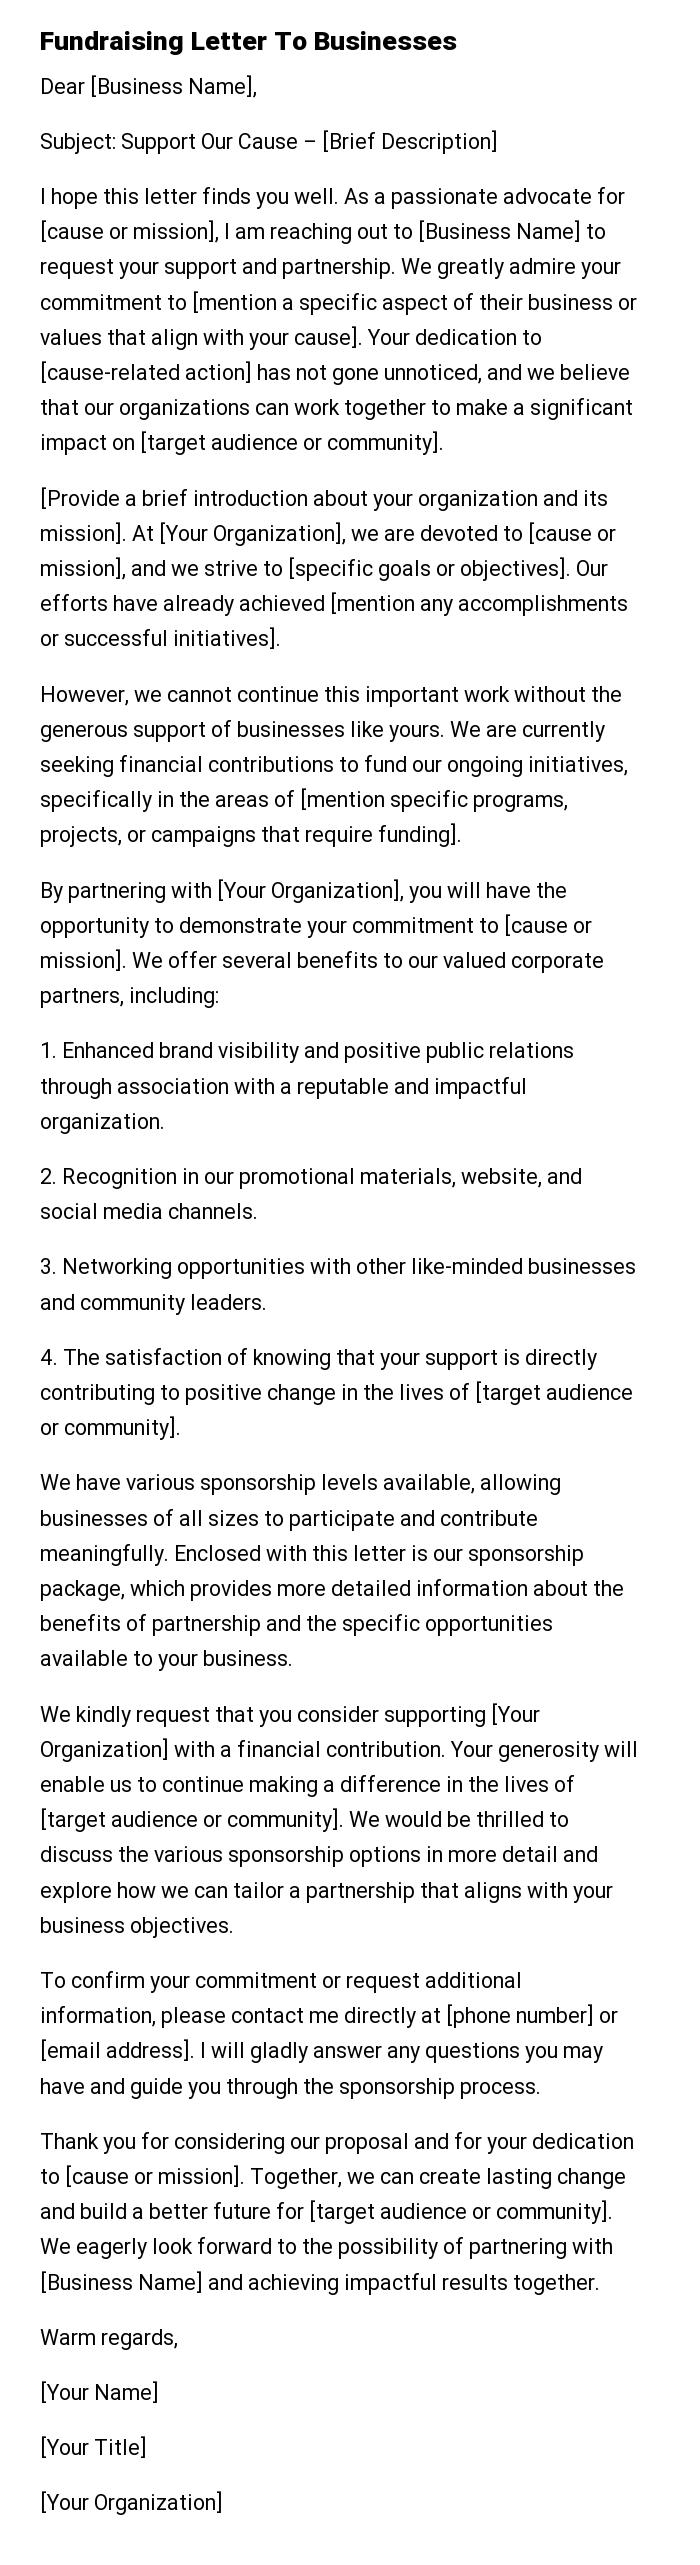 Fundraising Letter To Businesses